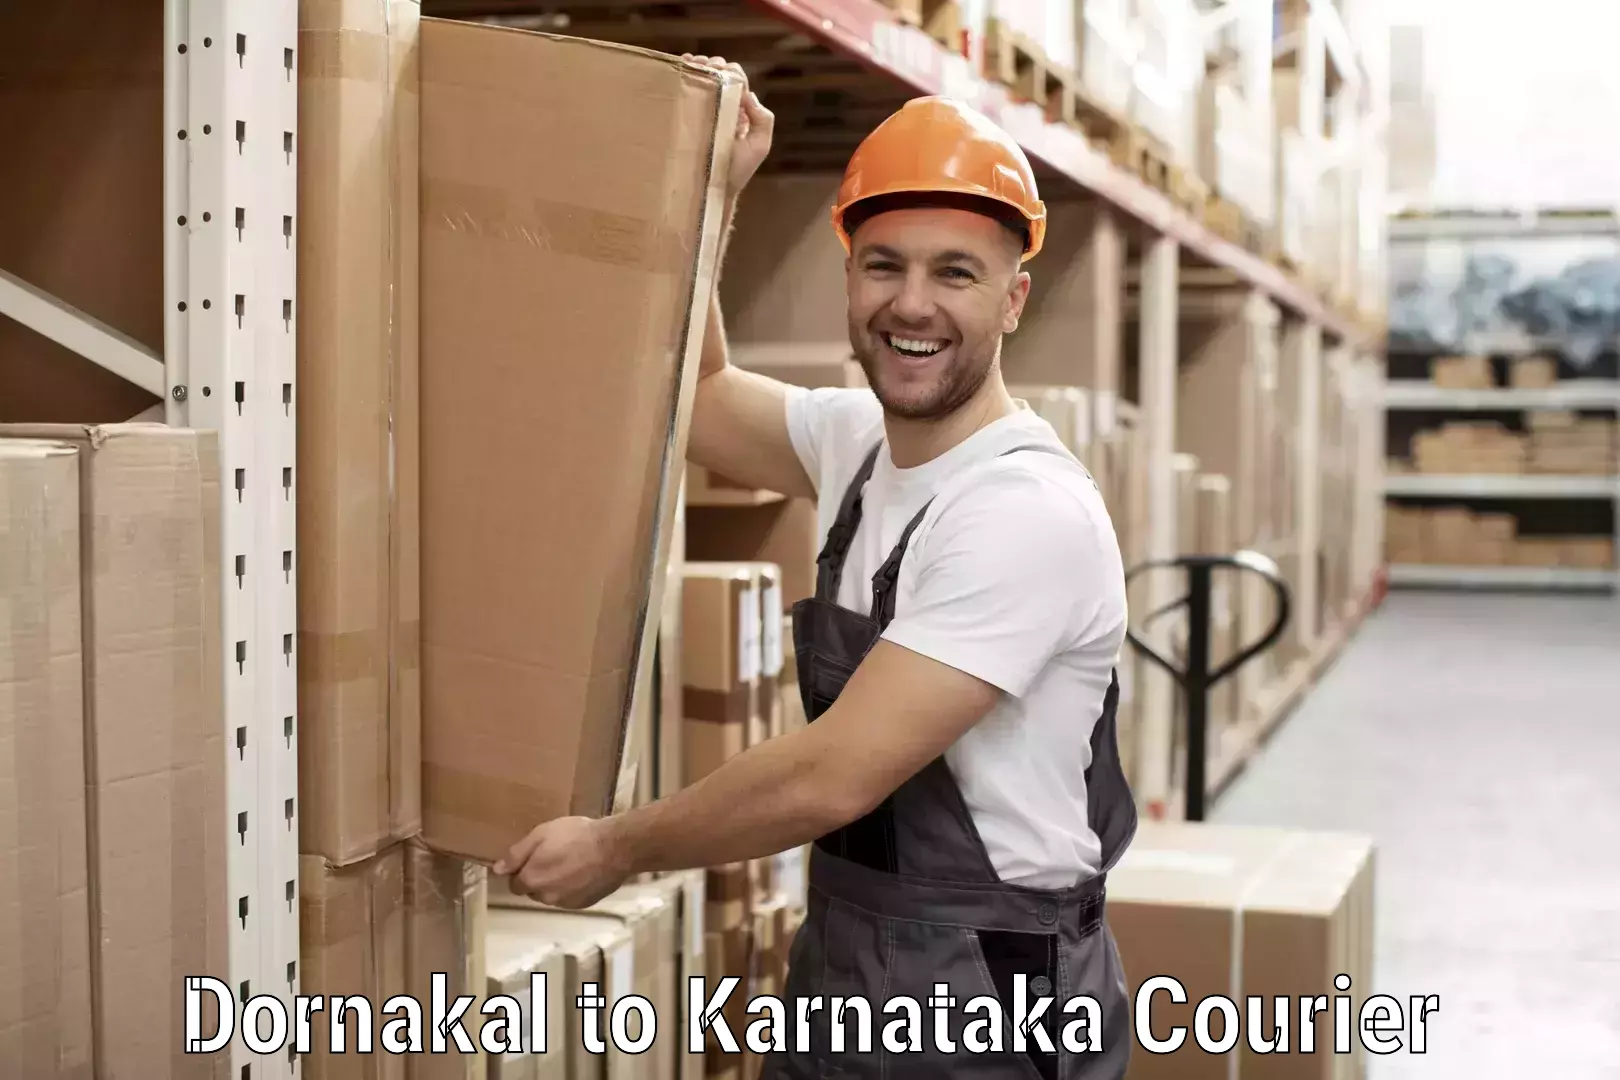 Courier service efficiency in Dornakal to Chikmagalur